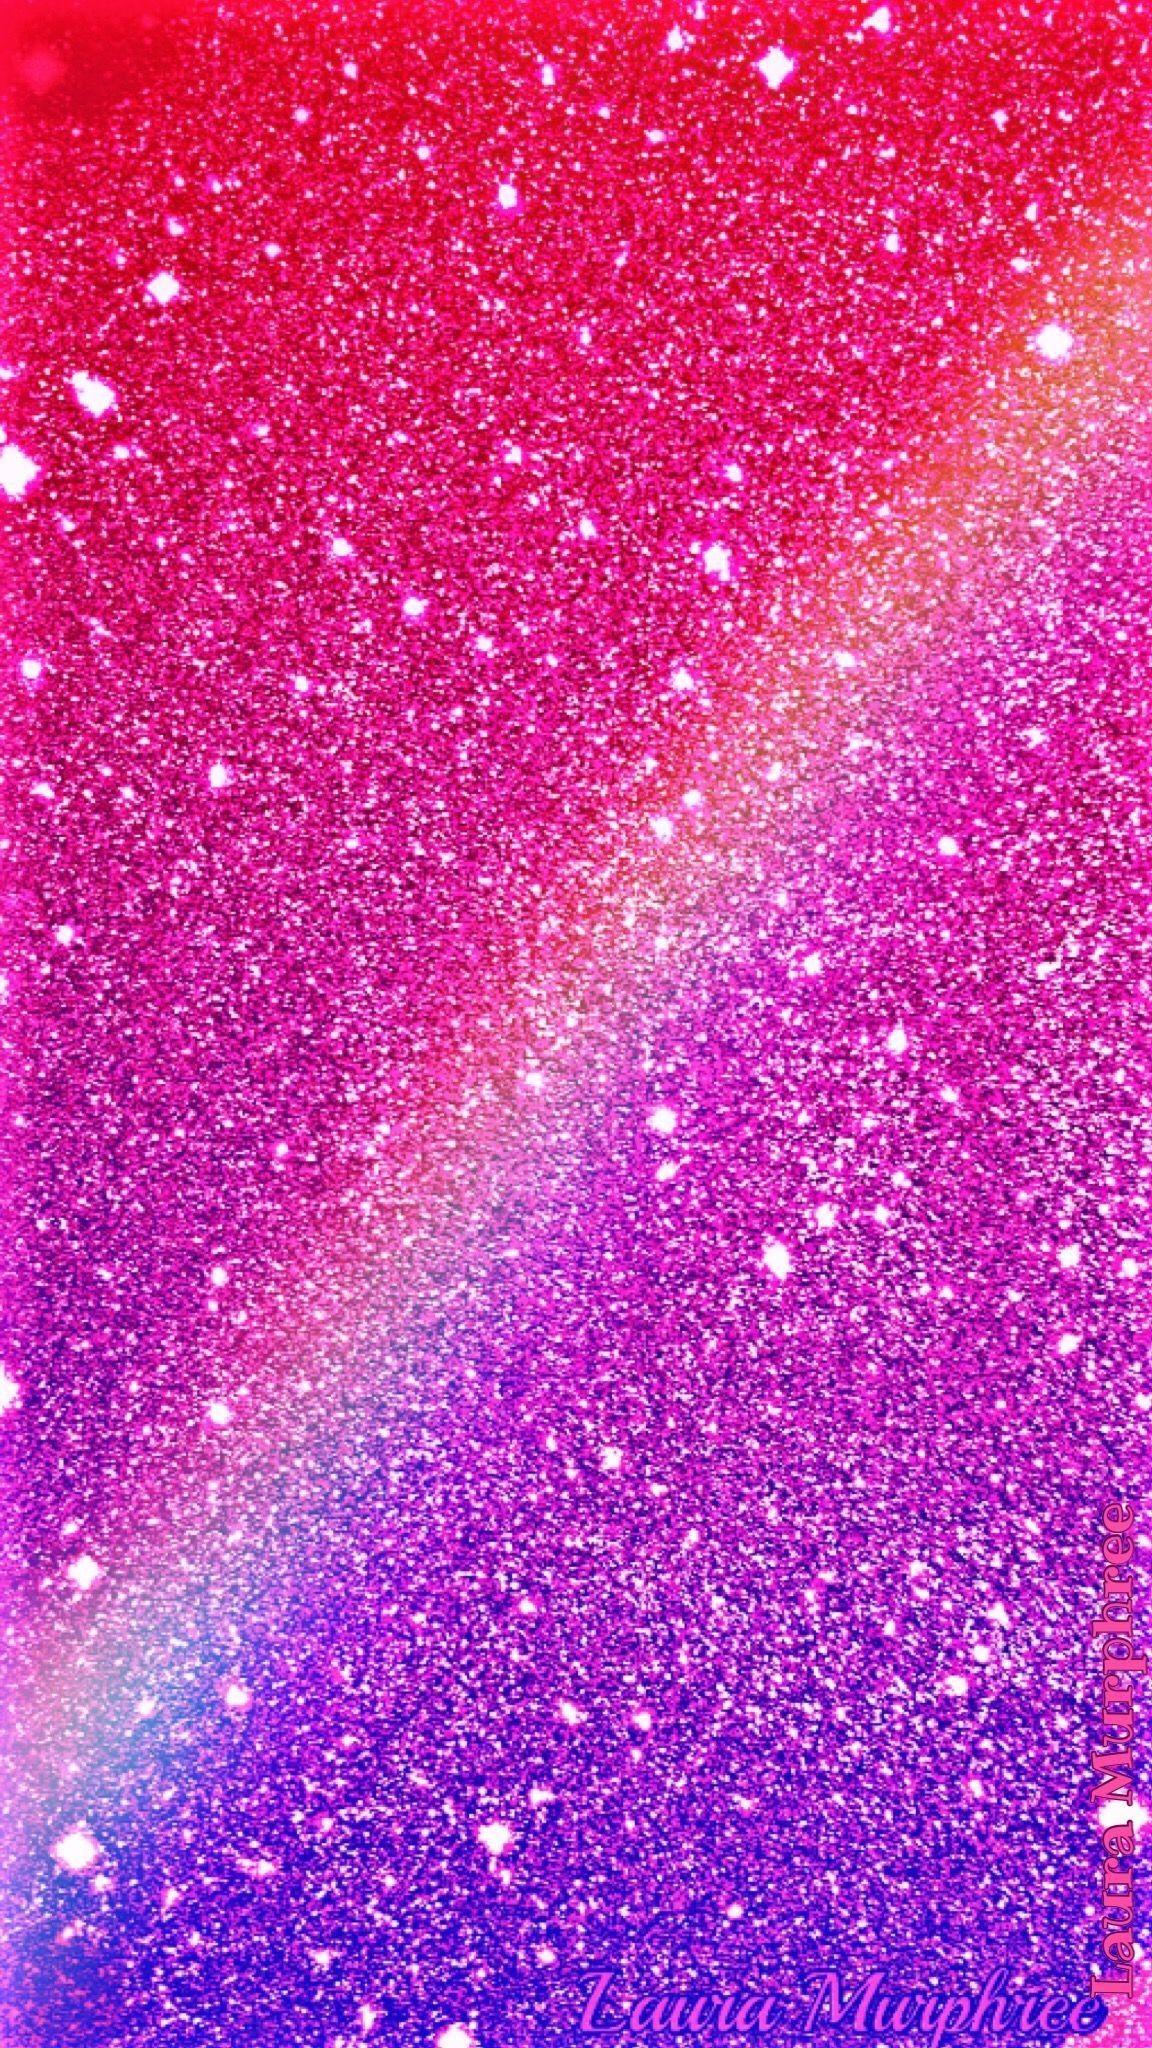 Pick a Rainbow Wallpaper to Bring Some Color Into Your Life